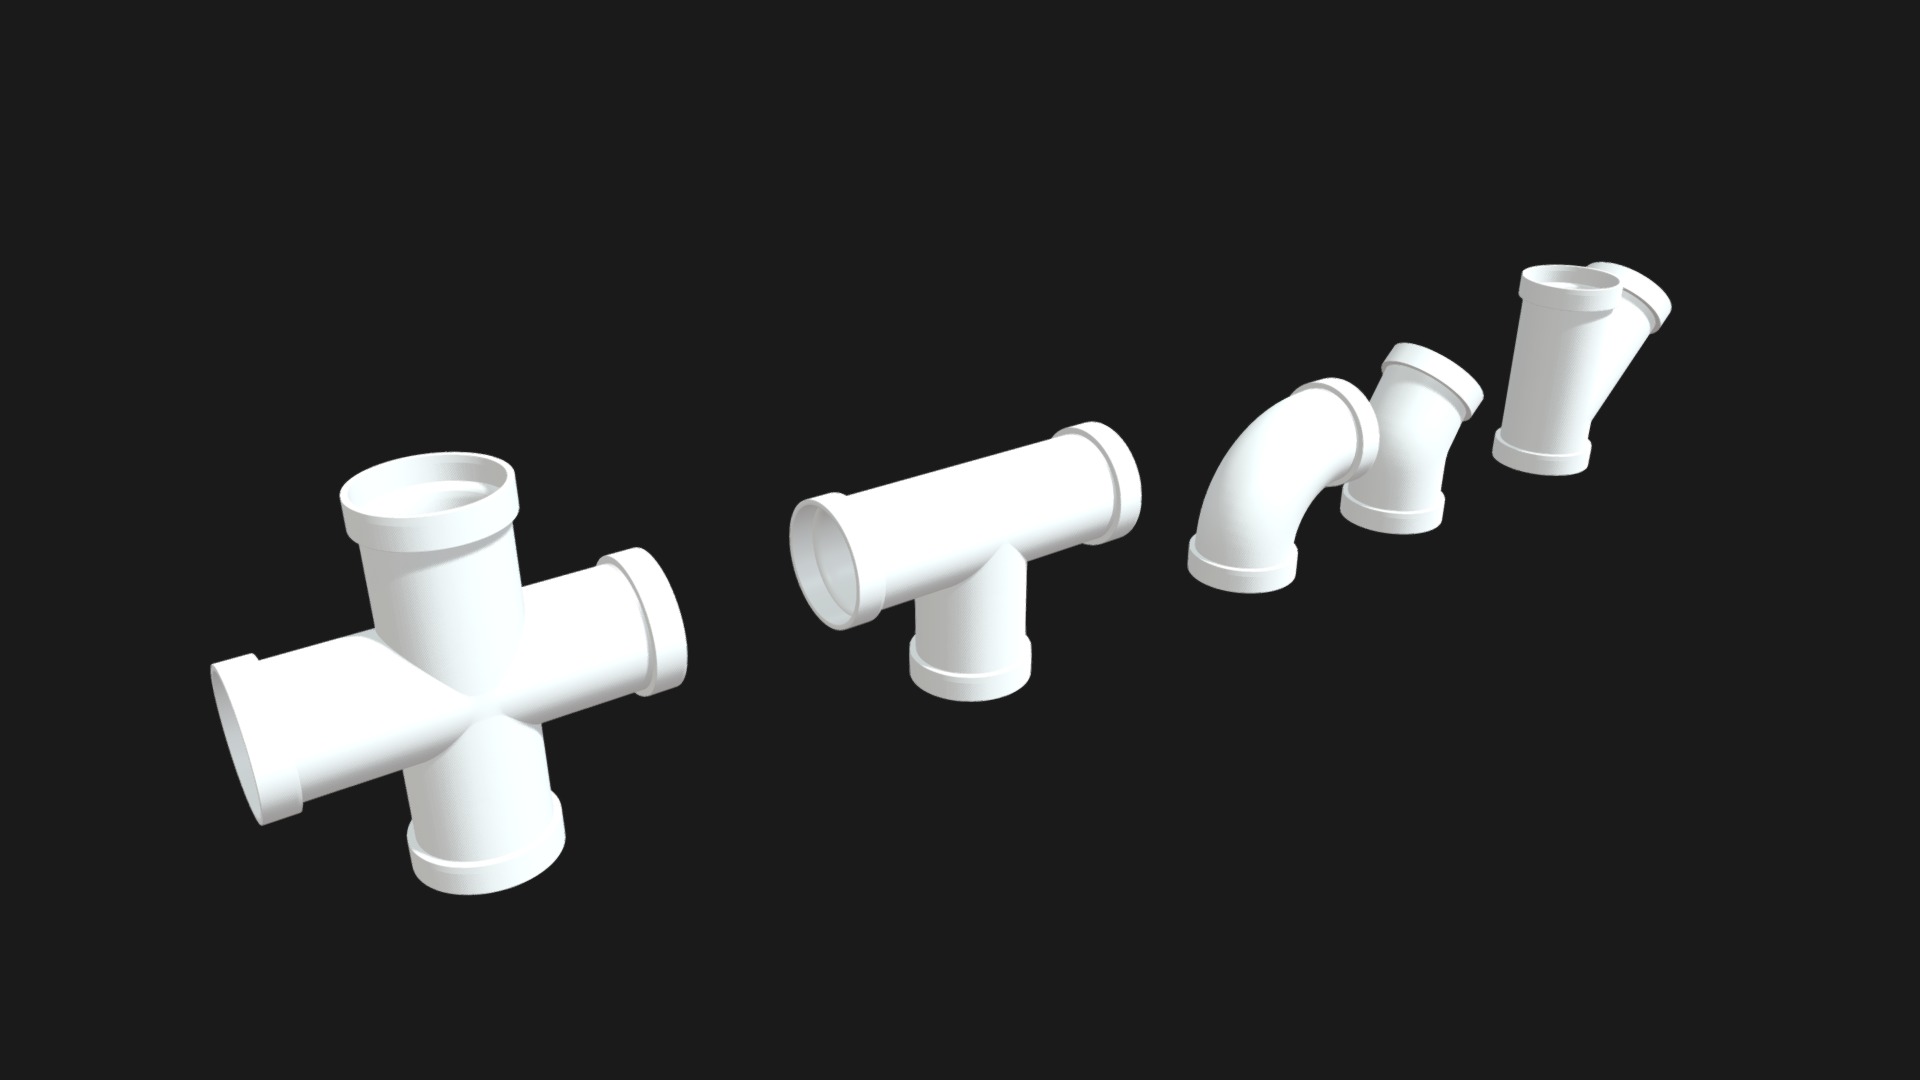 3D model PVC pipe joints - This is a 3D model of the PVC pipe joints. The 3D model is about a group of white plastic objects.